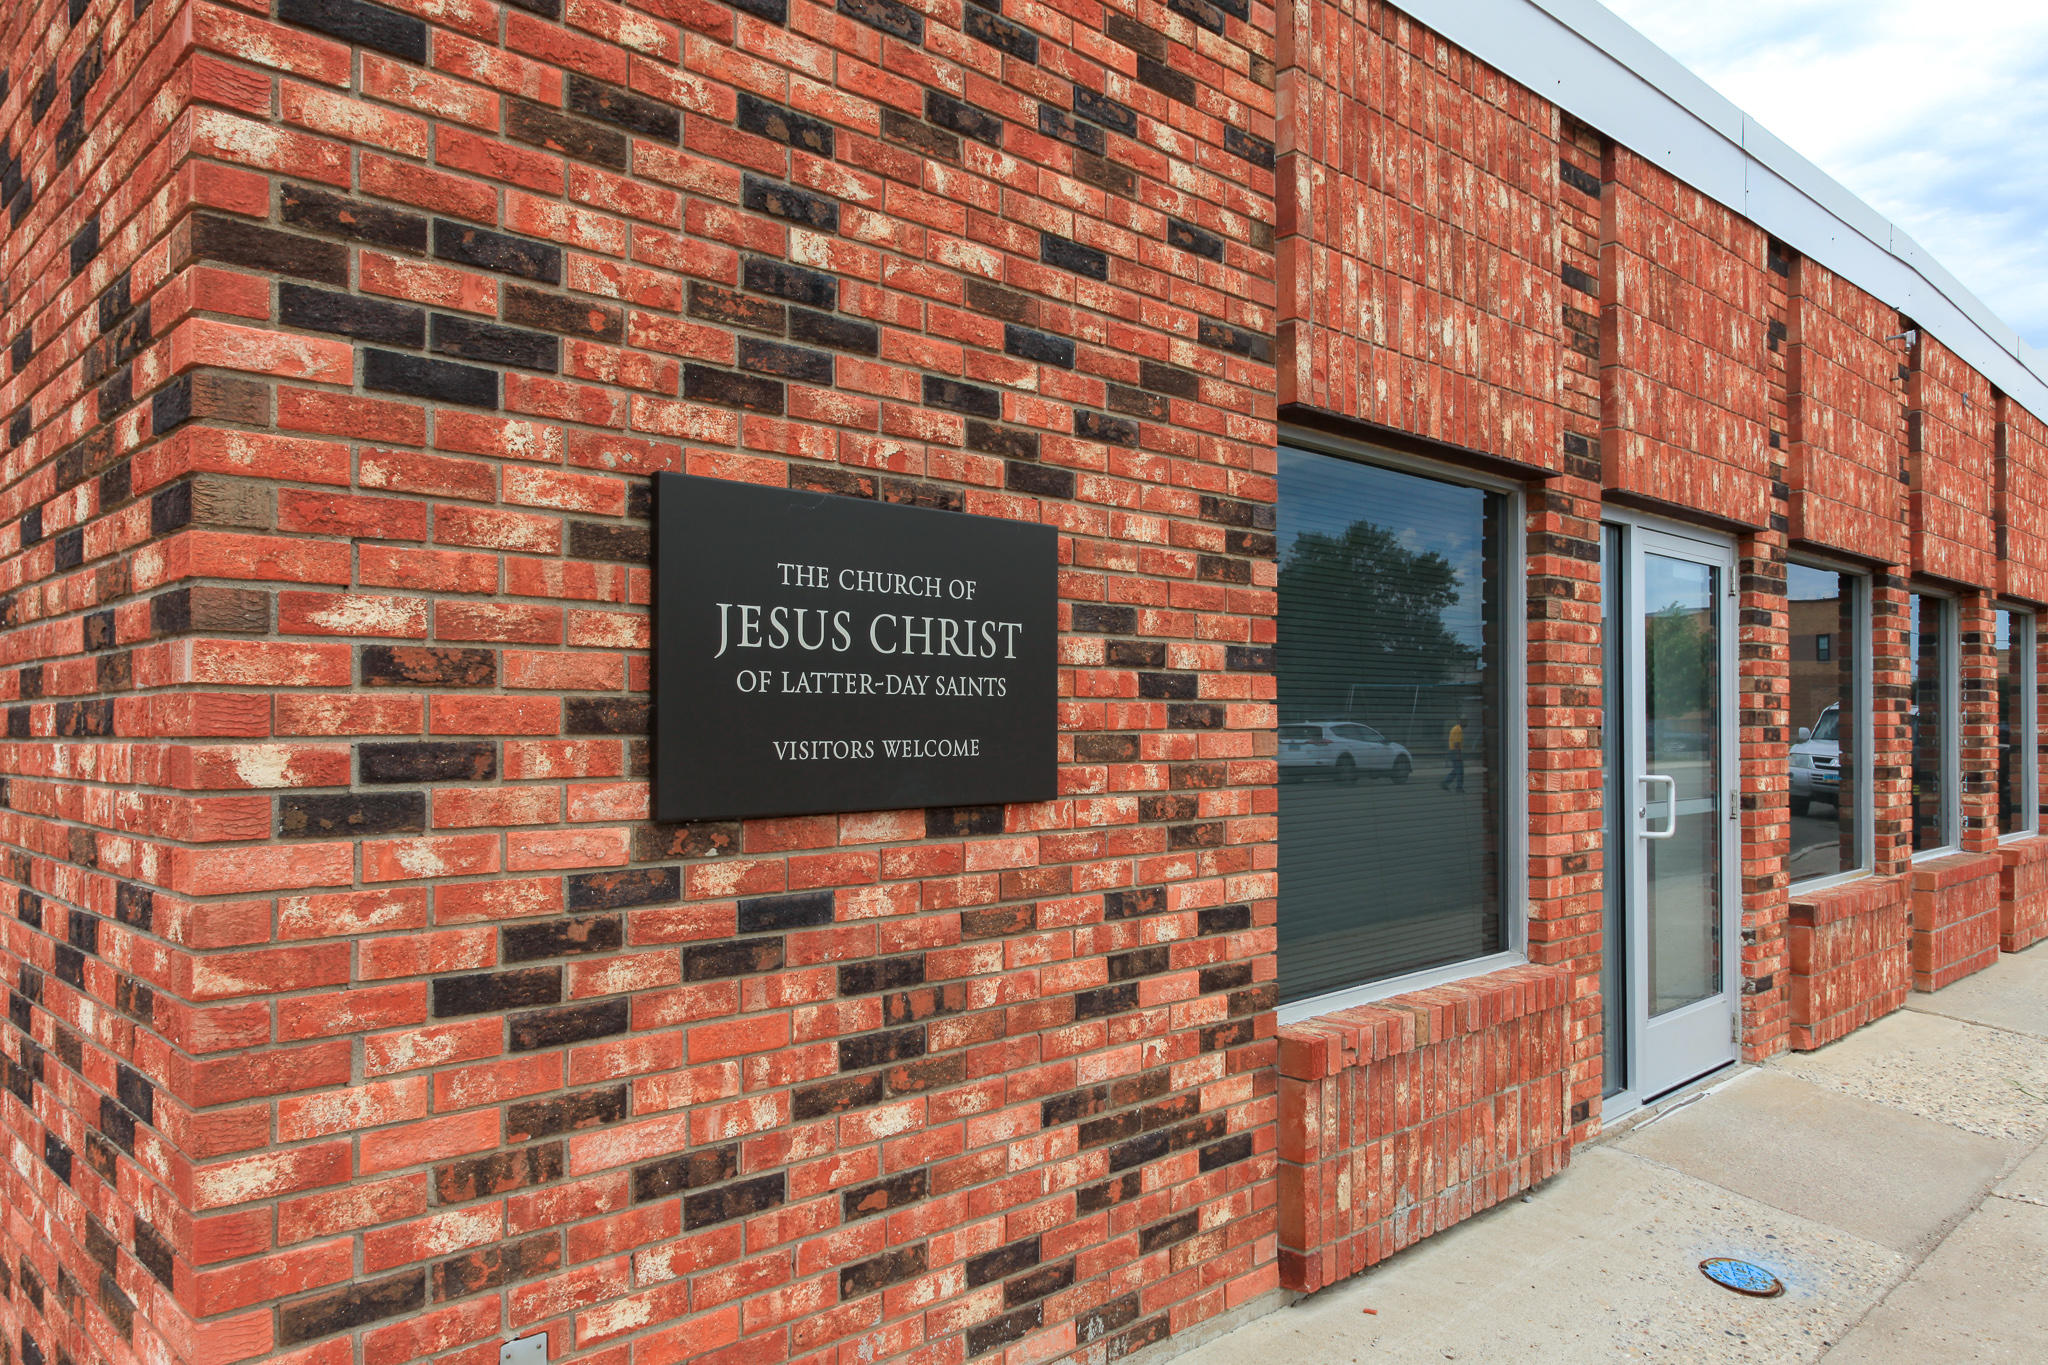 The Church of Jesus Christ of Latter-day Saints, Rugby ND 58368